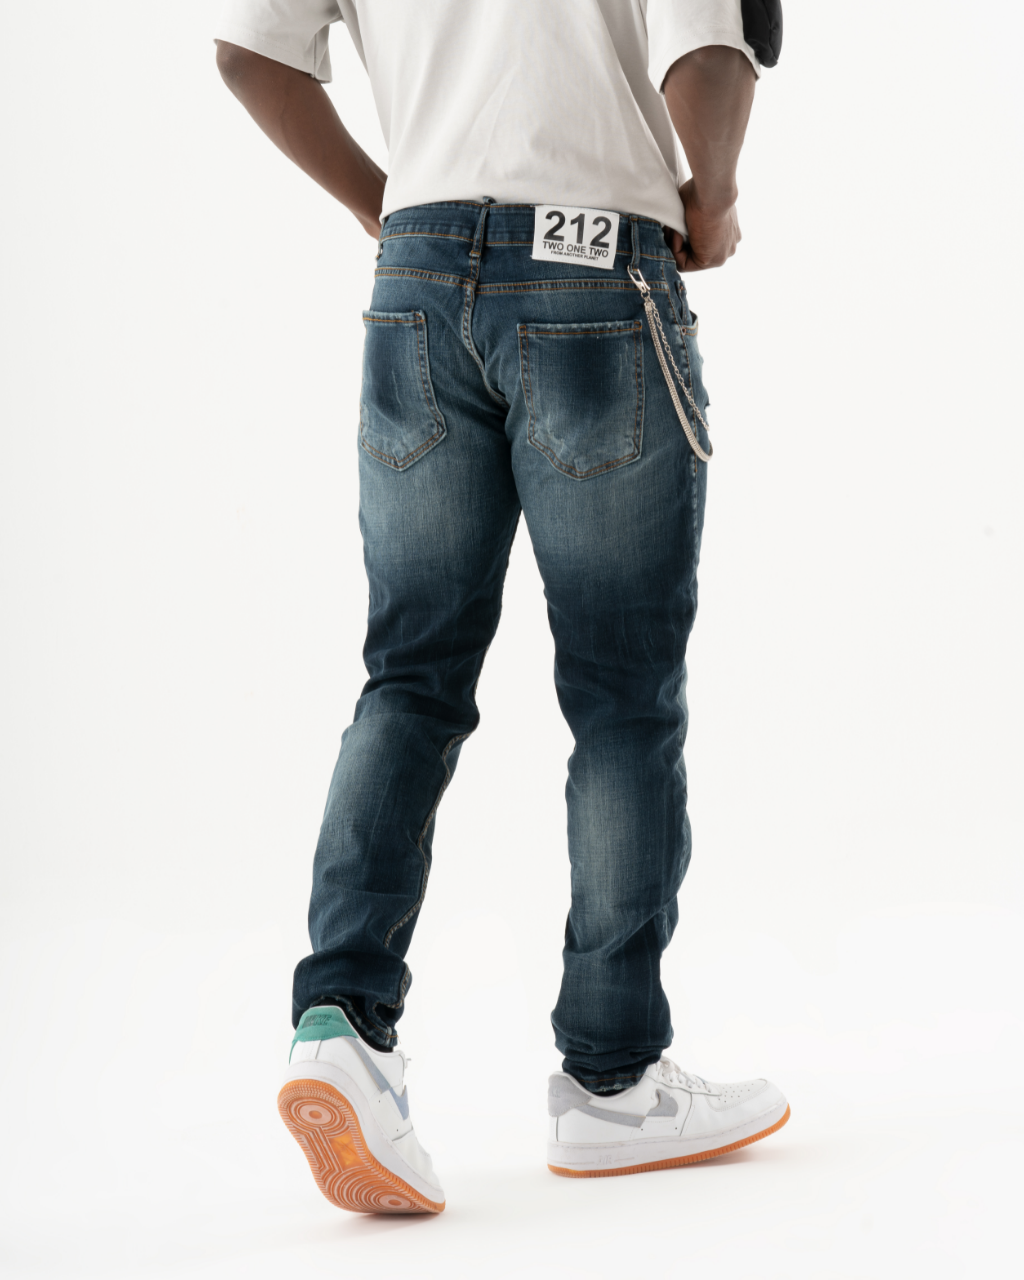 A man wearing a pair of KUDOS jeans and a white t-shirt.